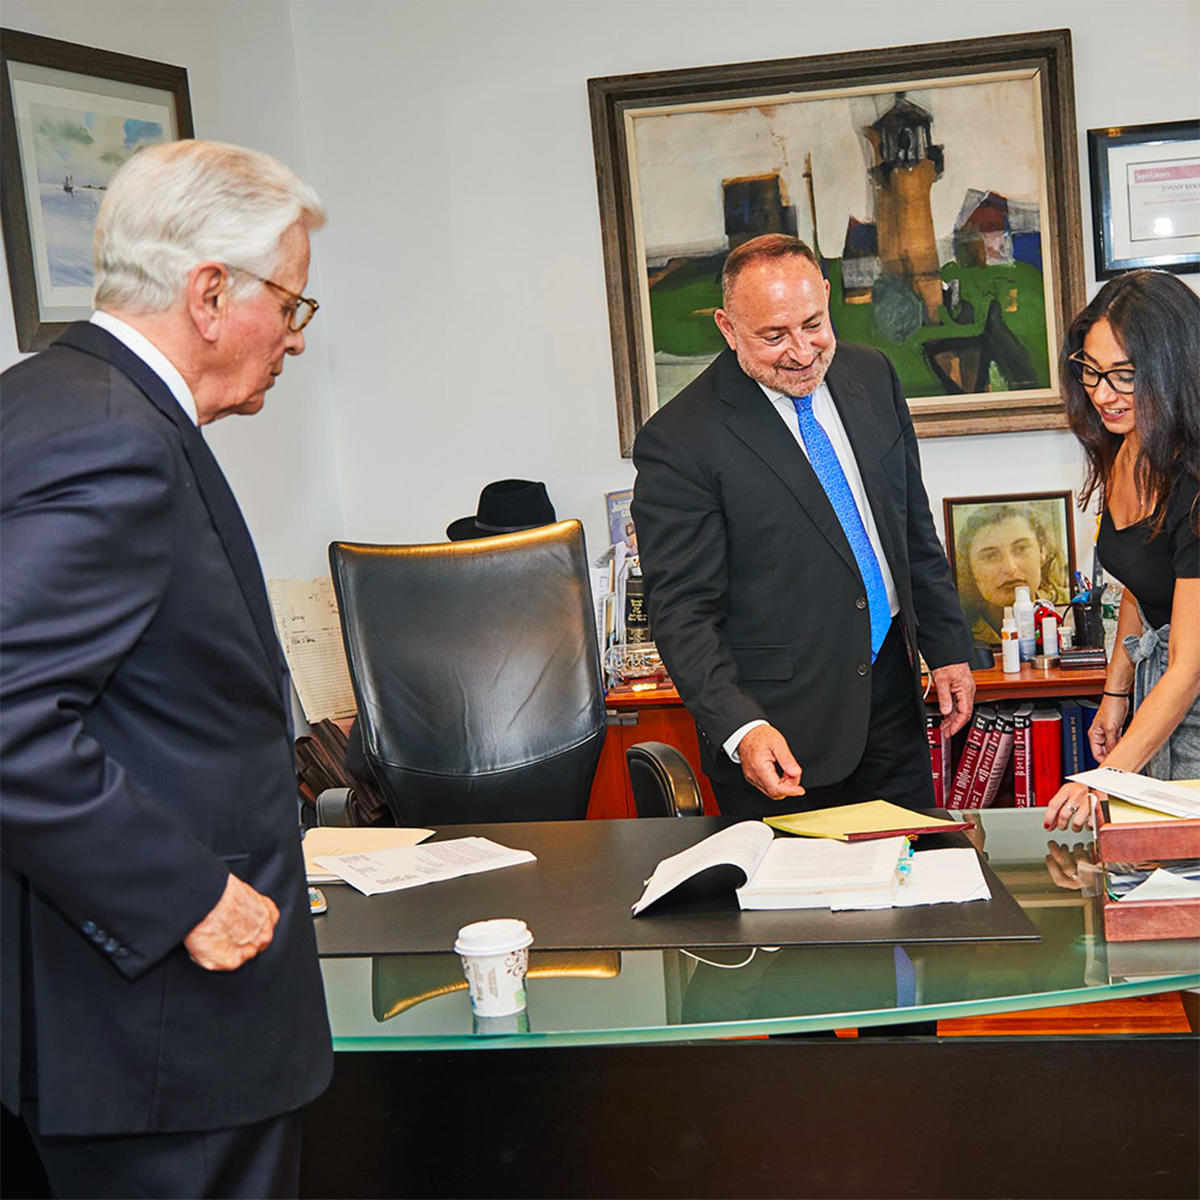 With decades of combined experience, our personal injury attorneys continue to serve clients in the Bronx & greater New York City areas. We know that proper legal representation depends upon an appreciation of every client's needs & circumstances. We take the time to develop each individualized attorney-client relationship. We invest the resources necessary to recover fair compensation. We are your Bronx personal injury lawyers.